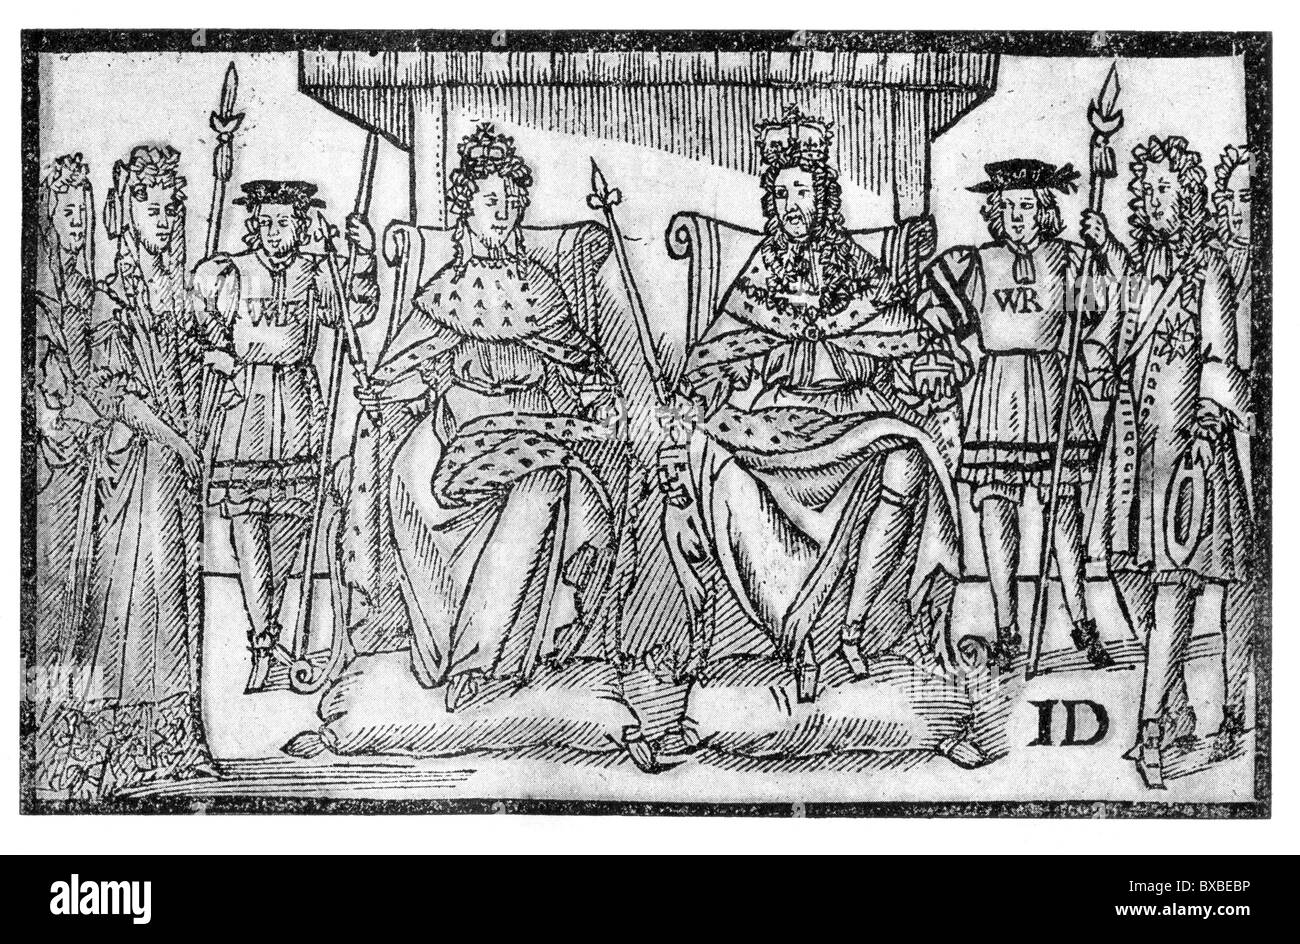 The Protestants' Joy; Coronation of King William III of England and his Wife Mary, 14 April 1689; Black and White Illustration; Stock Photo